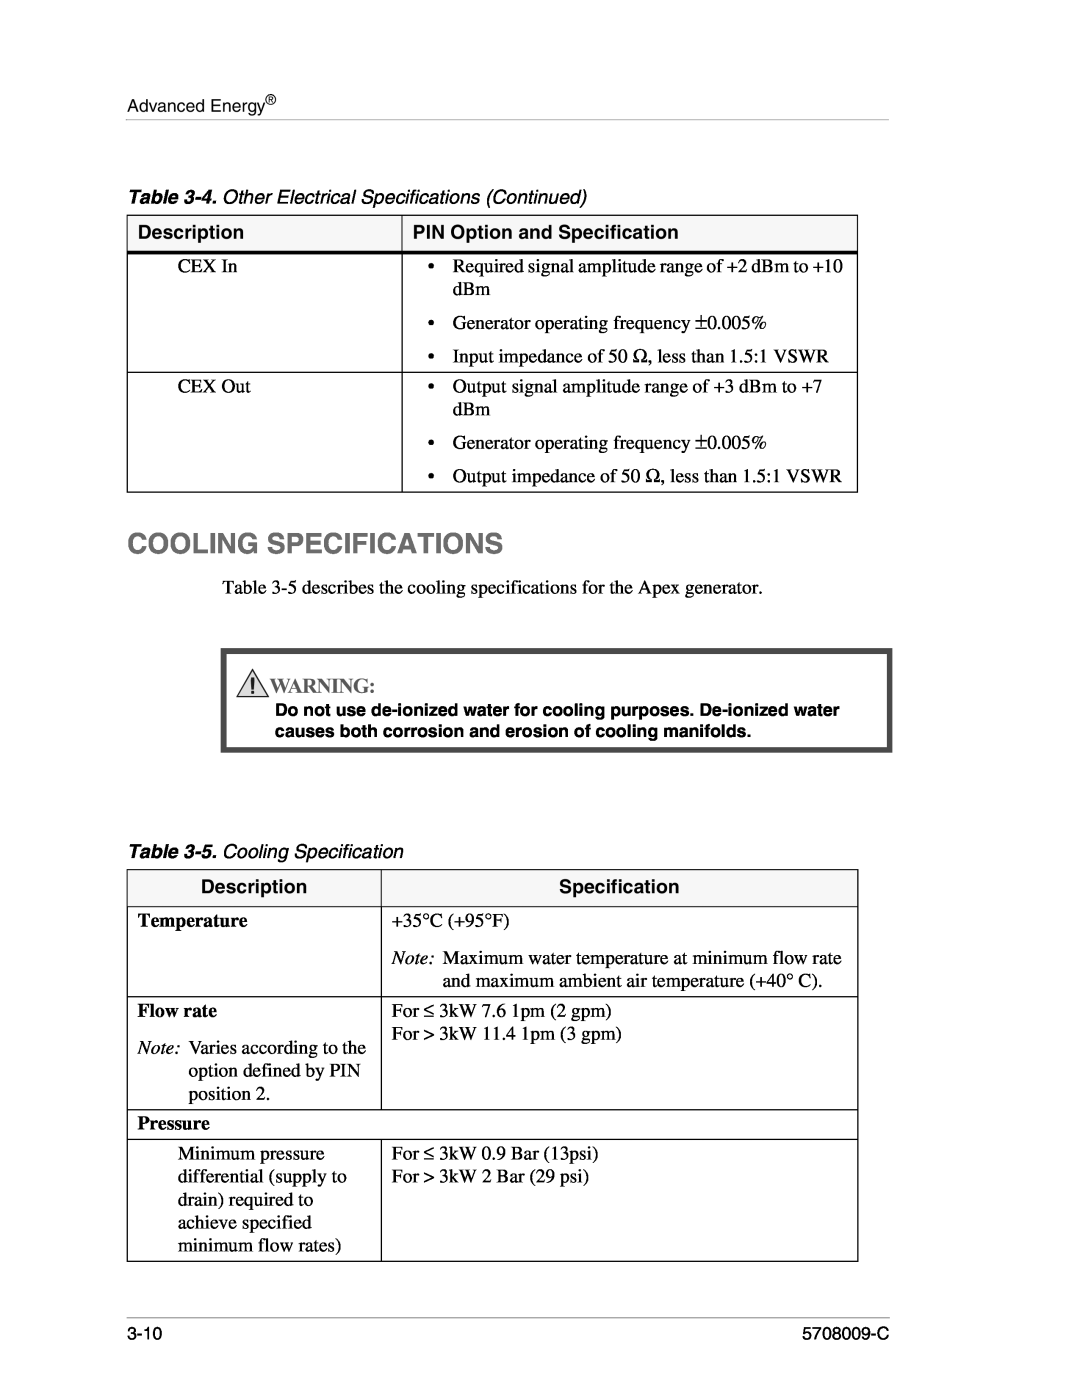 Apex Digital 5708009-C Cooling Specifications, 4. Other Electrical Specifications Continued, 5. Cooling Specification 